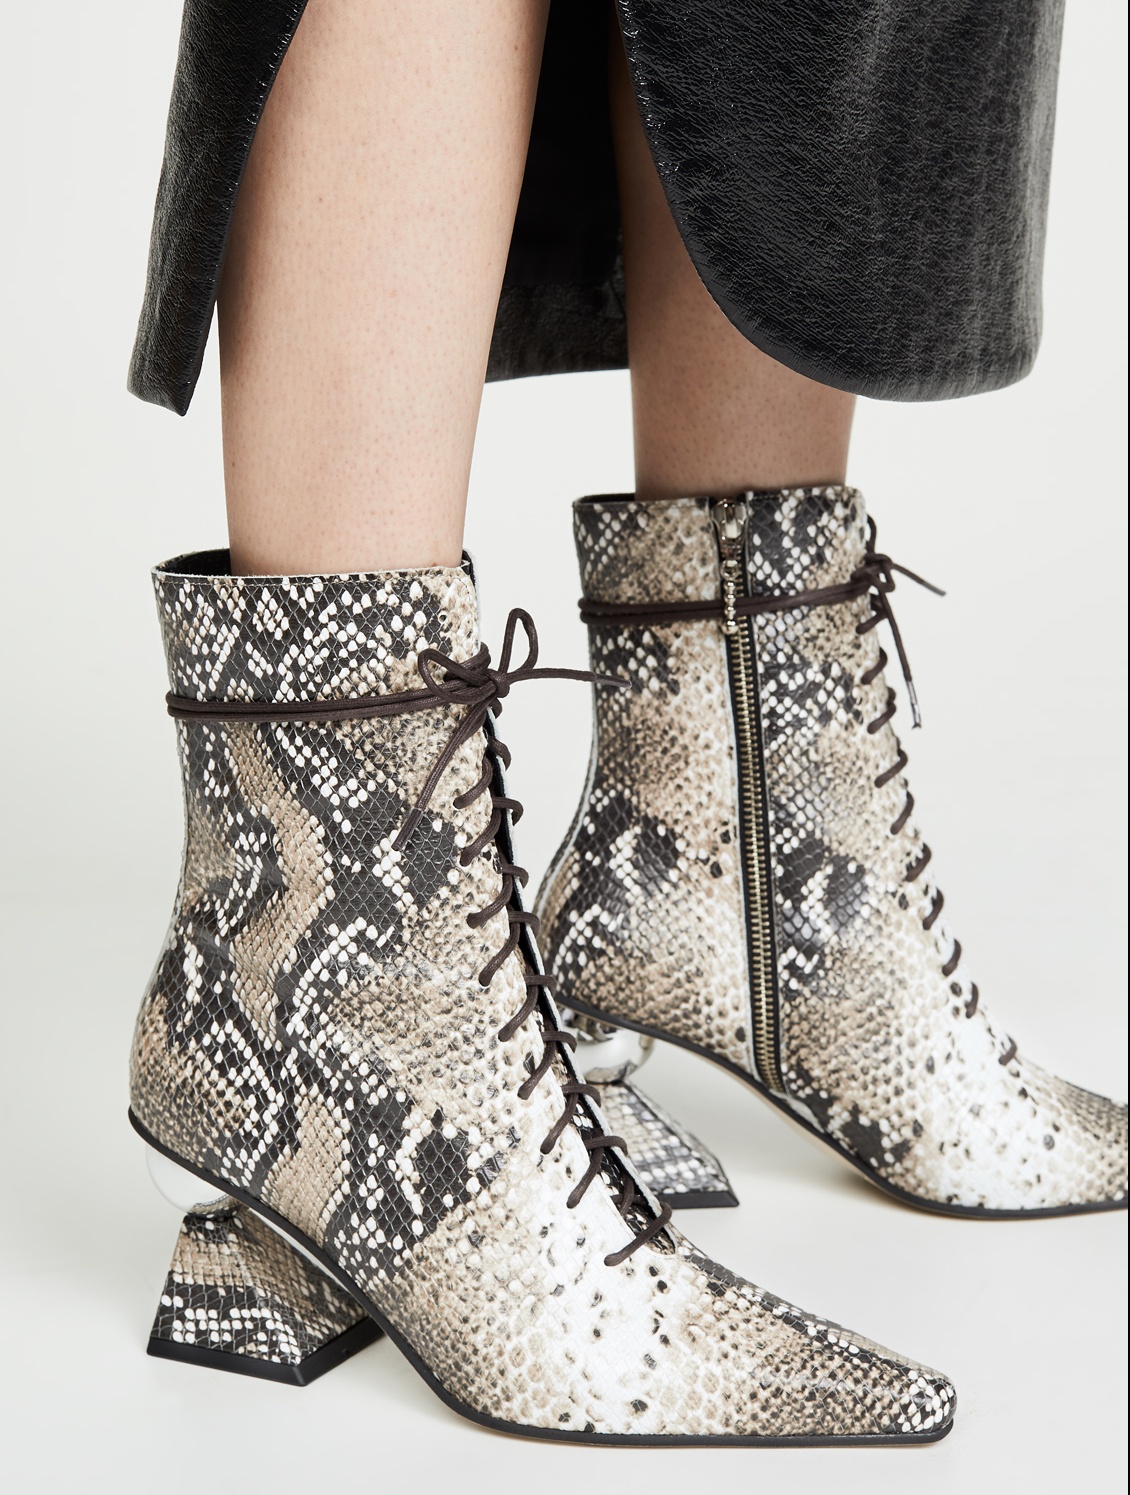 Python print booties by Yuul Yie with sculptural heels